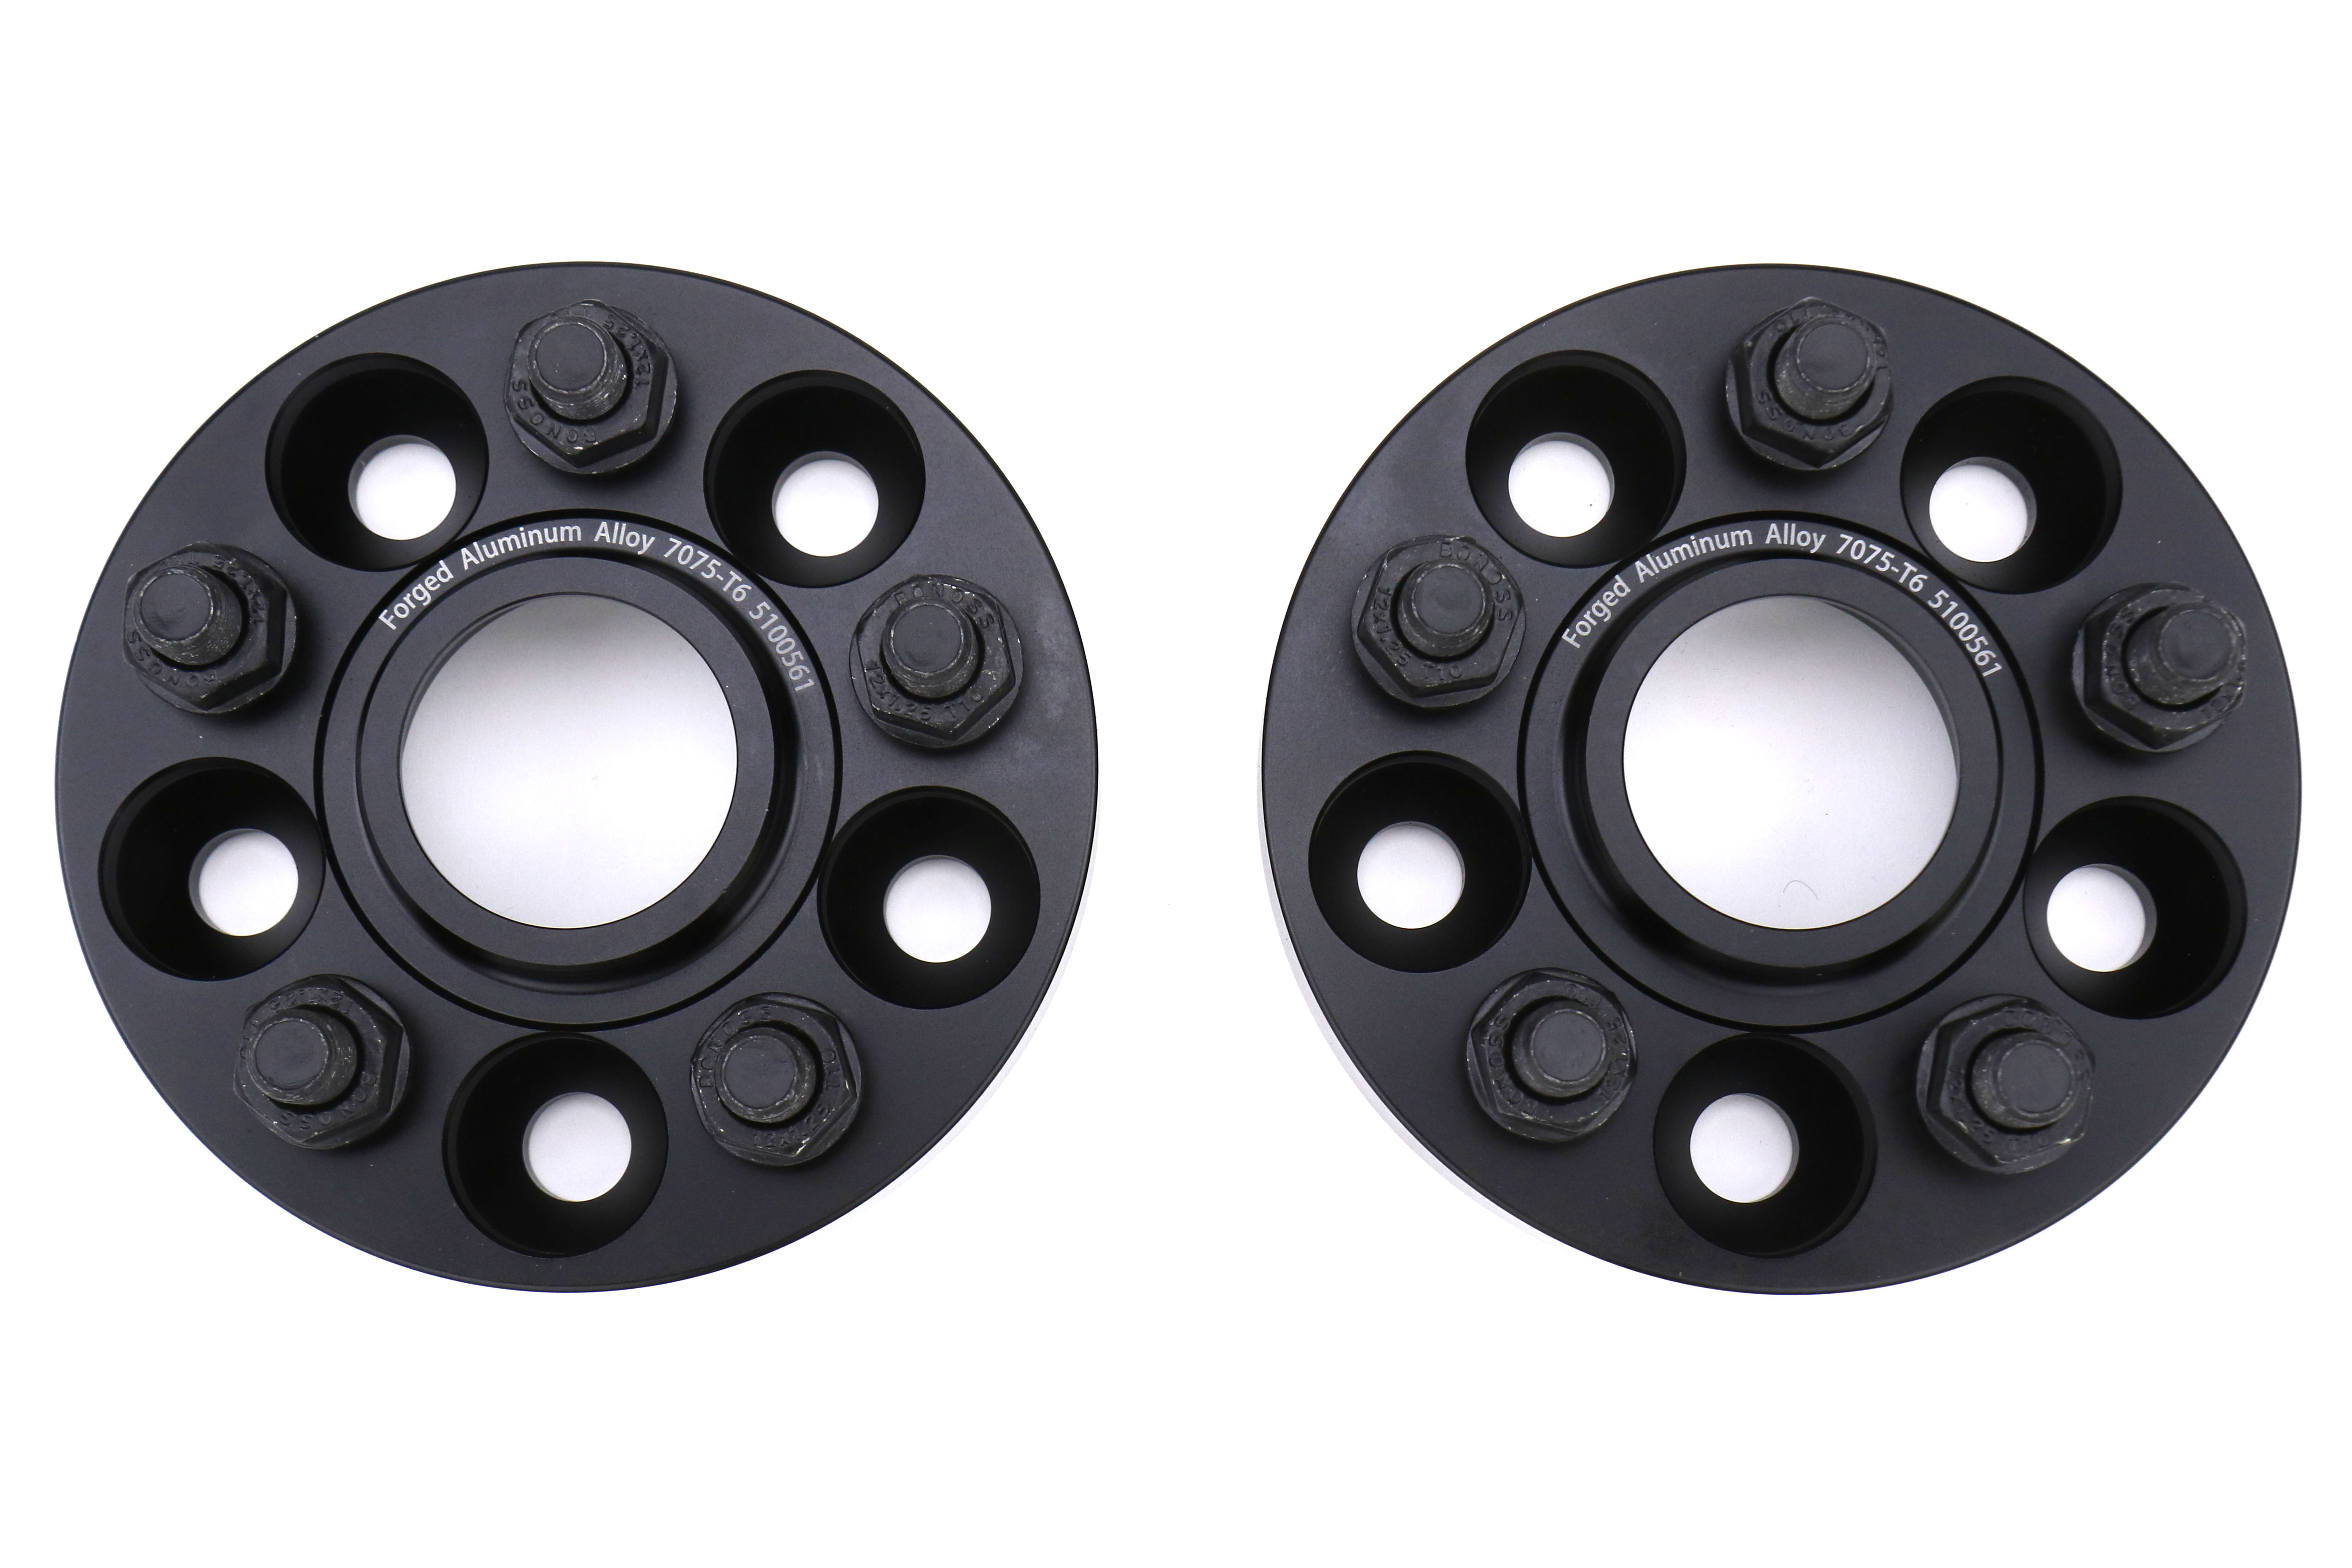 Torque Solution Forged Aluminum Wheel Spacers 5x100 25mm Pair